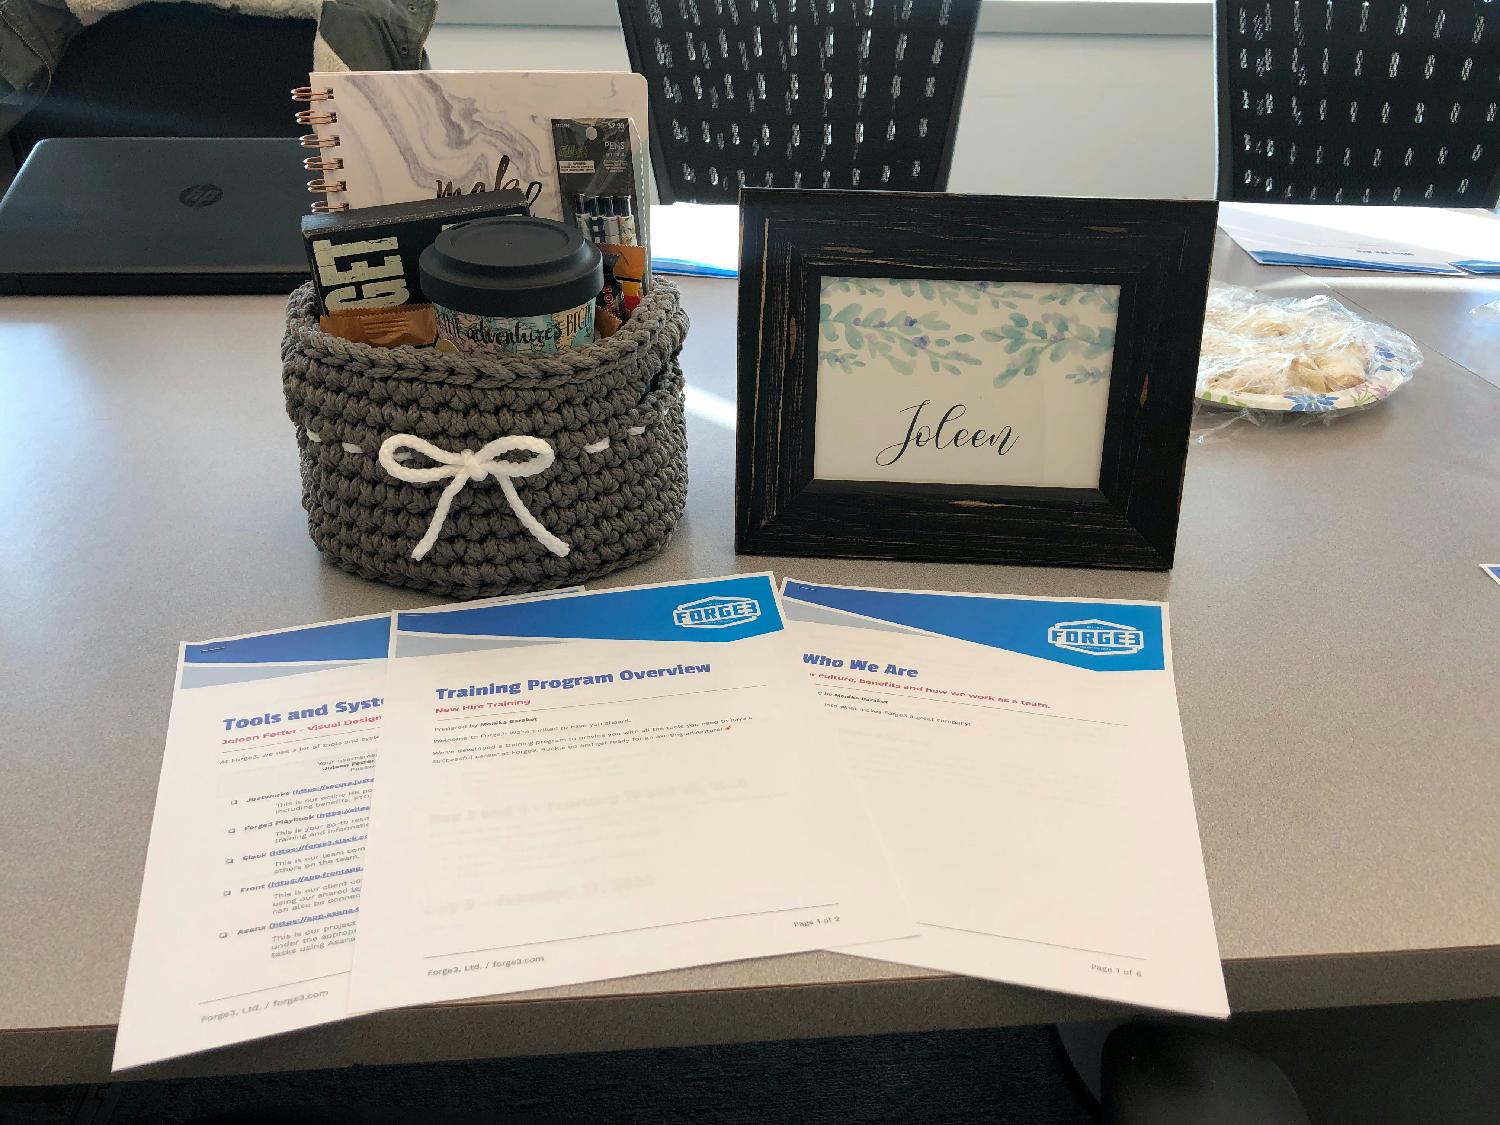 How we welcome new people to our team. The basket is handmade by our Chief Production Officer and the framed art is hand drawn by one of our designers. We stock the basket full of goodies. 